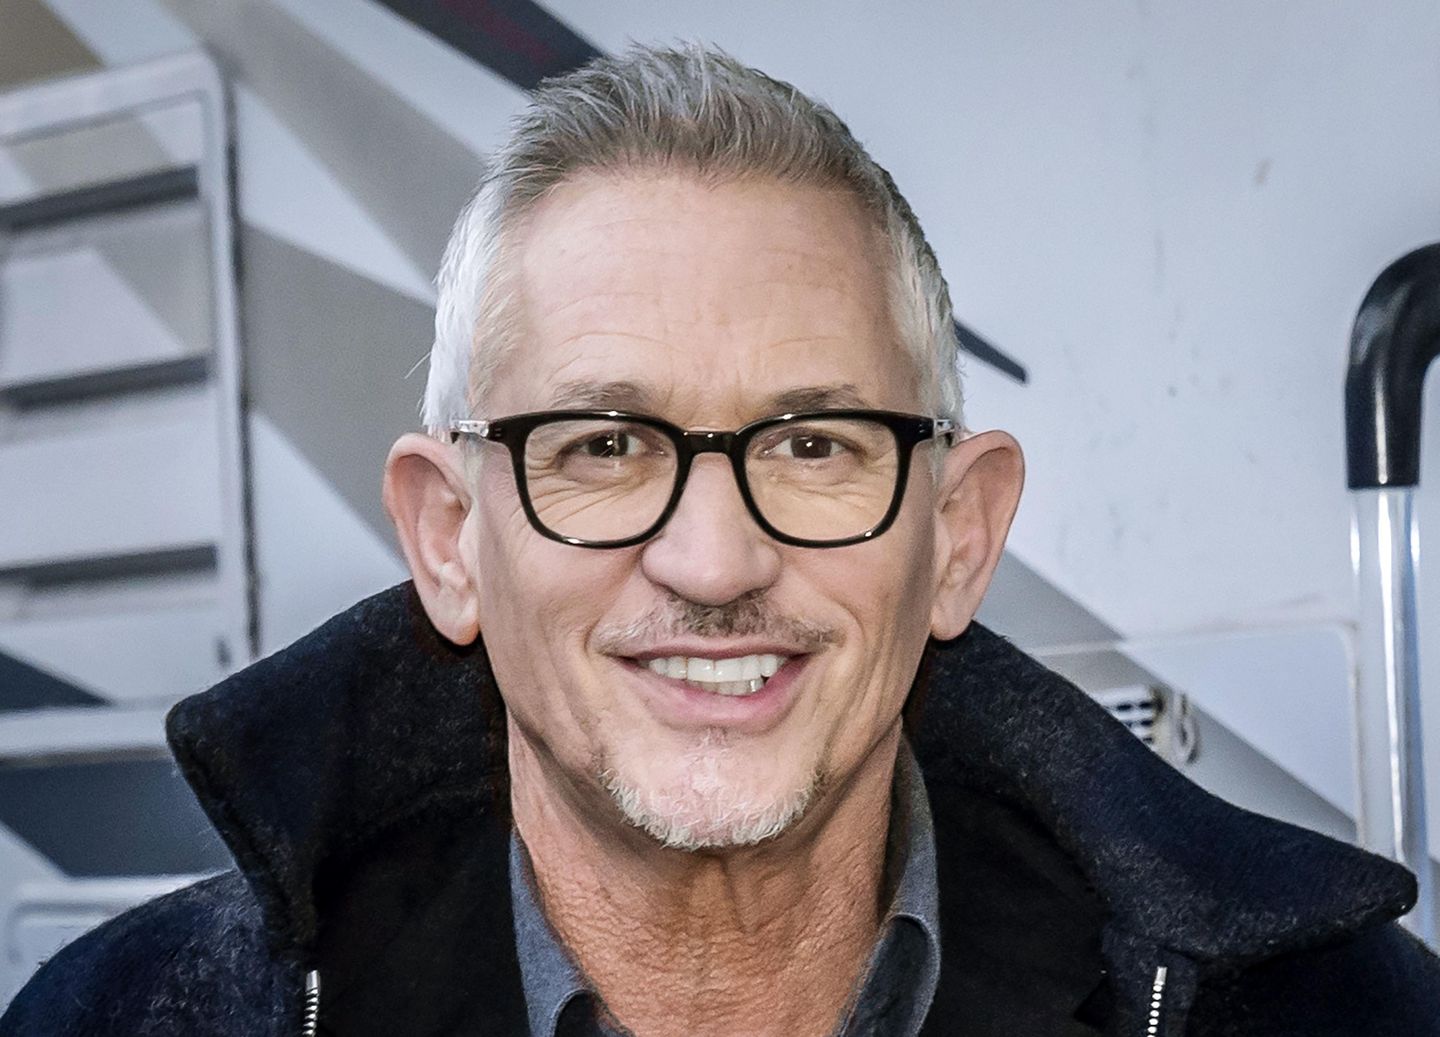 Gary Lineker back on air to lead BBC's FA Cup coverage